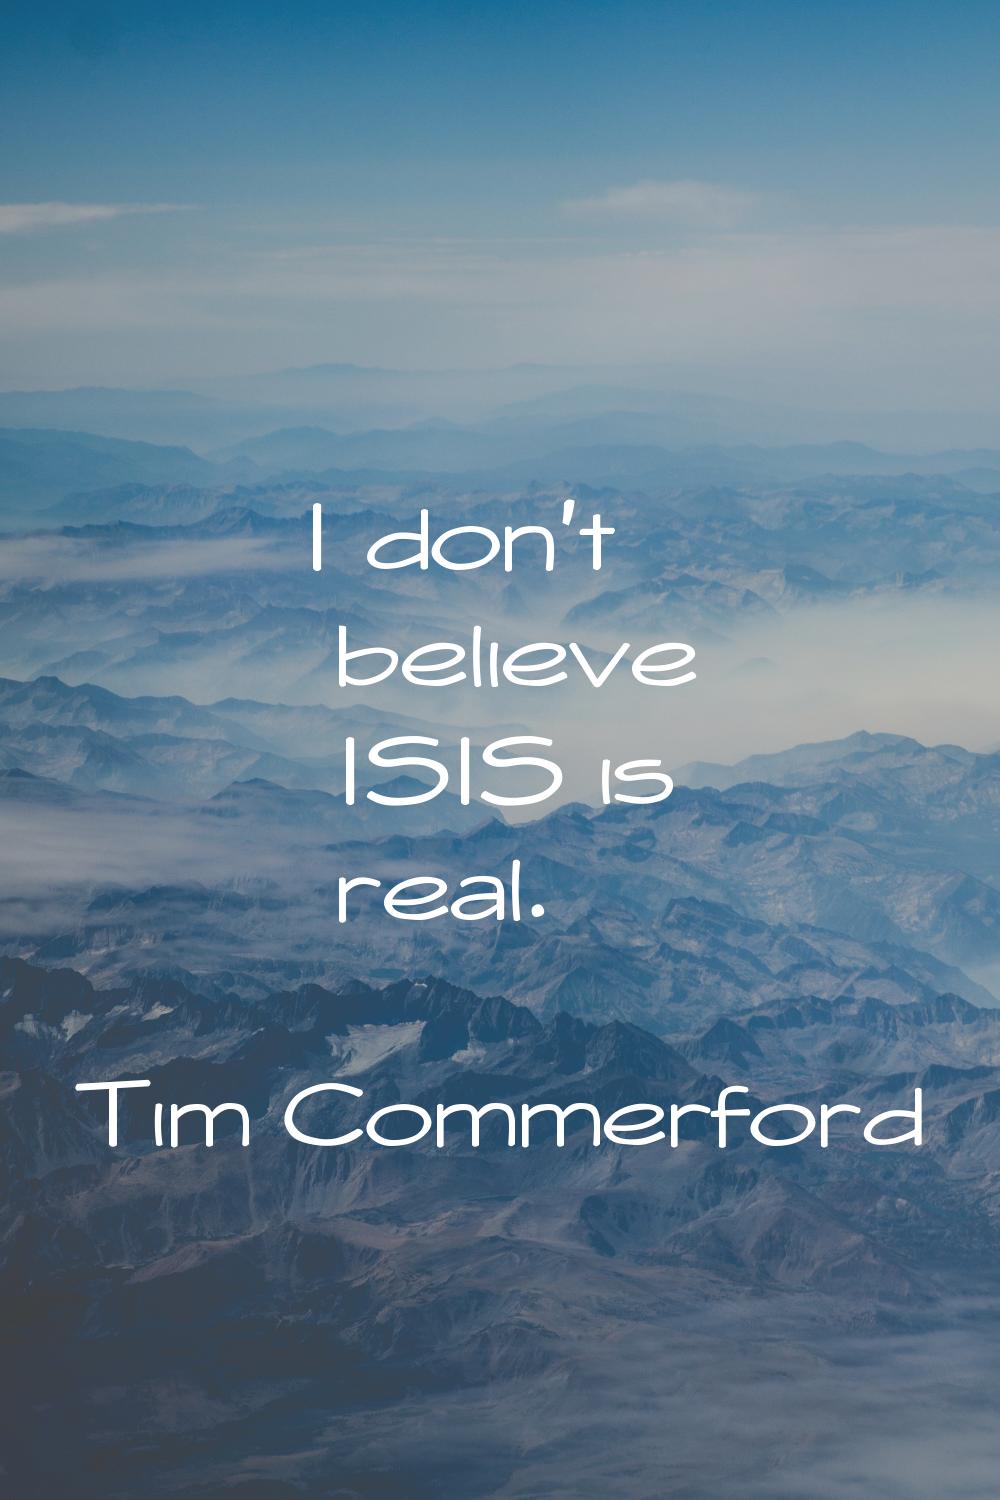 I don't believe ISIS is real.